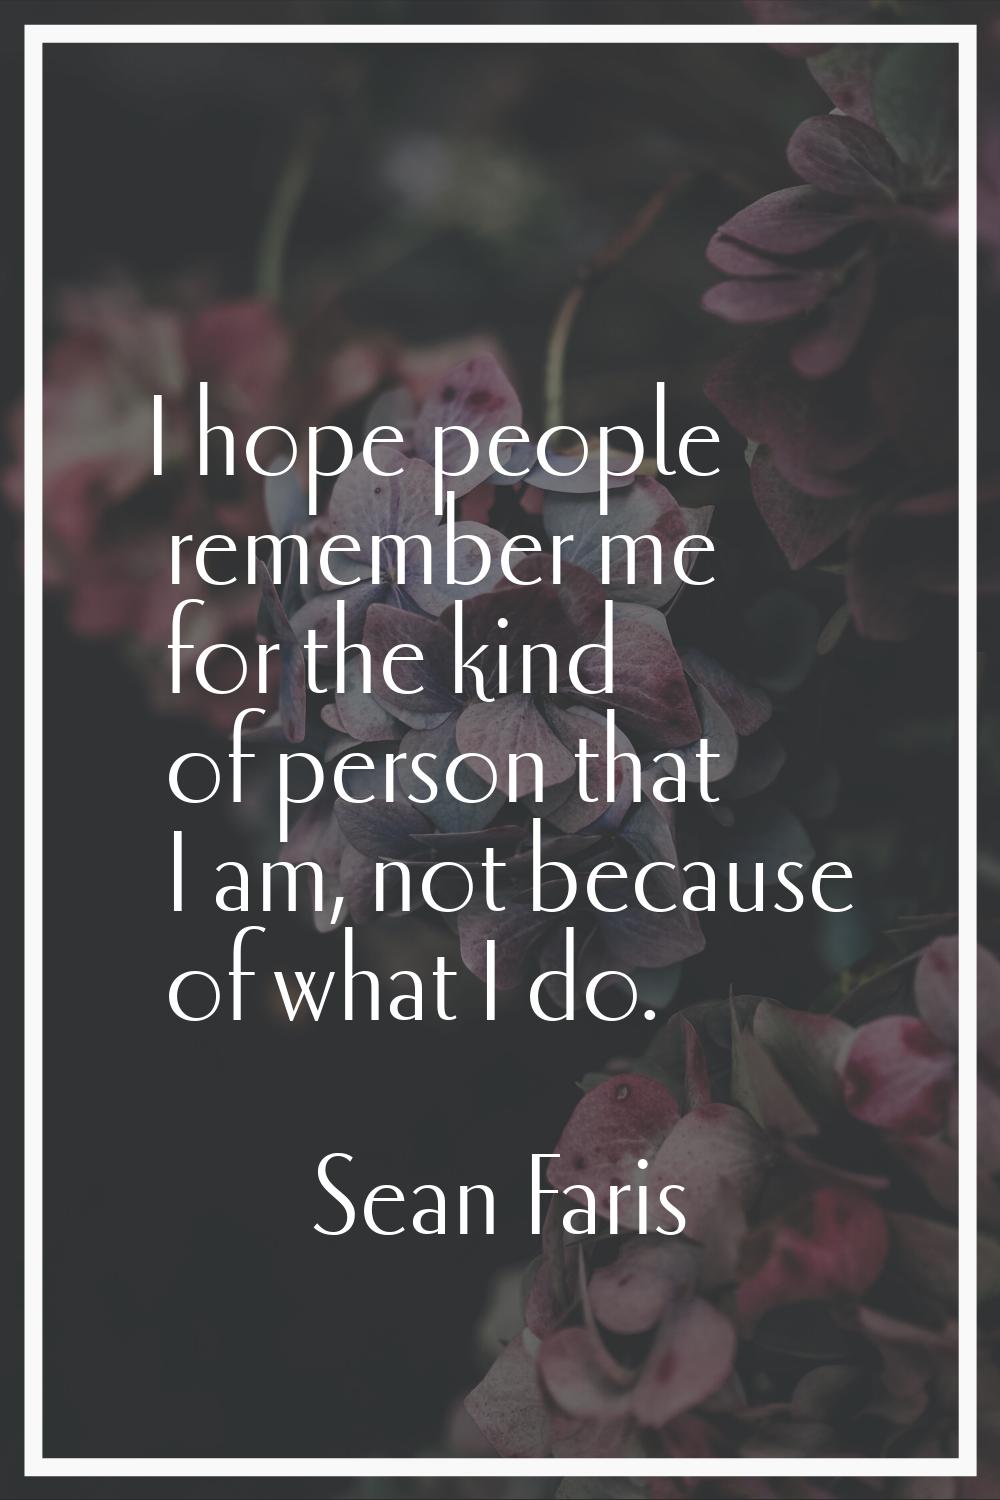 I hope people remember me for the kind of person that I am, not because of what I do.